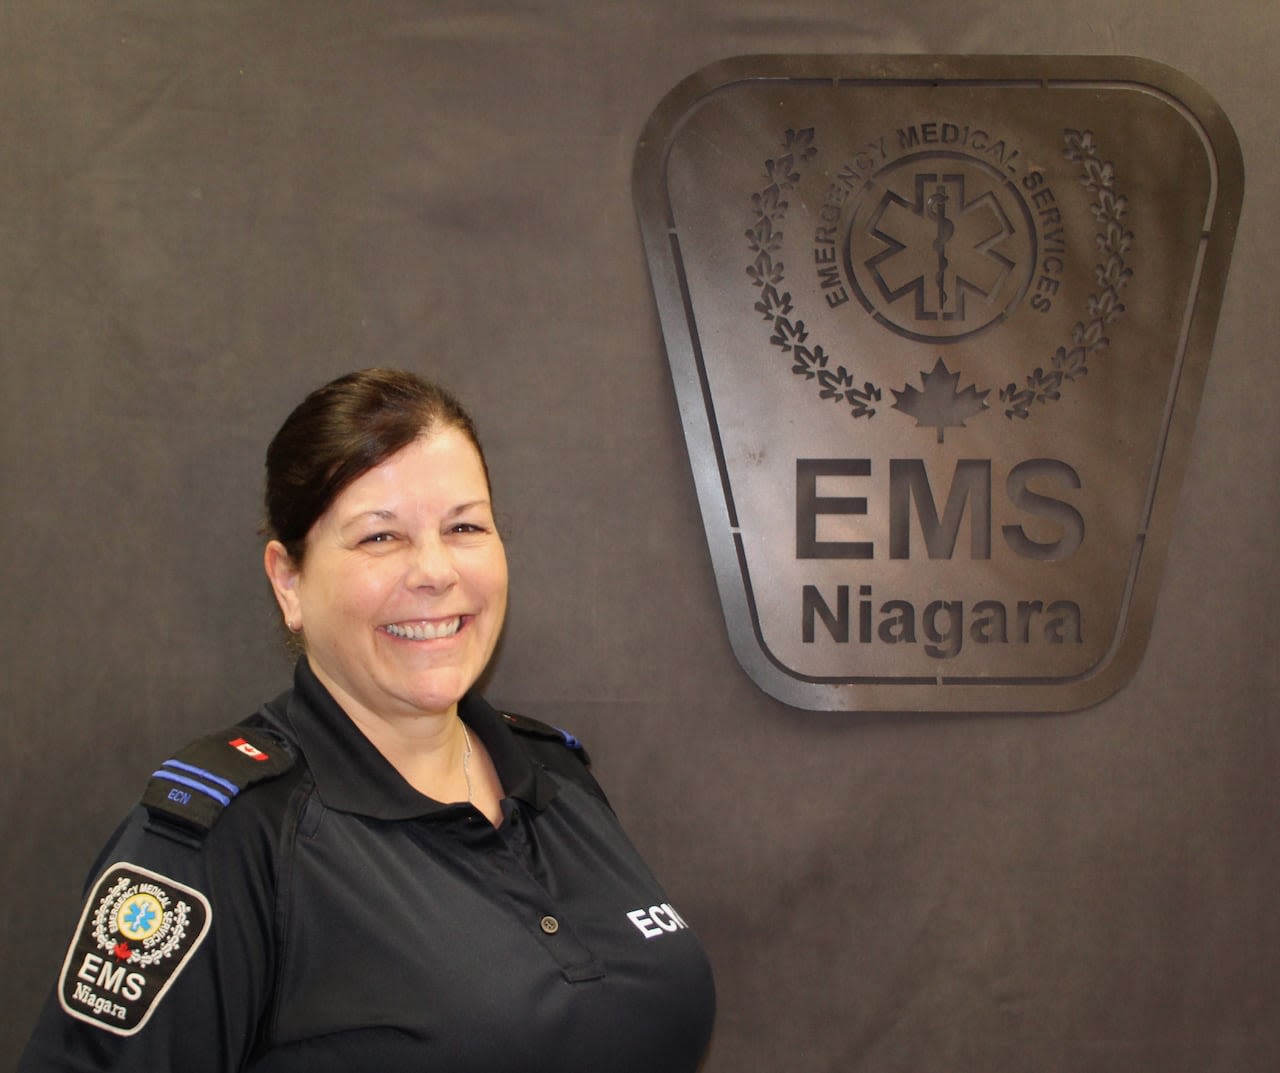 Nurse 911 system in Niagara leads to less need for emergency ambulance responses